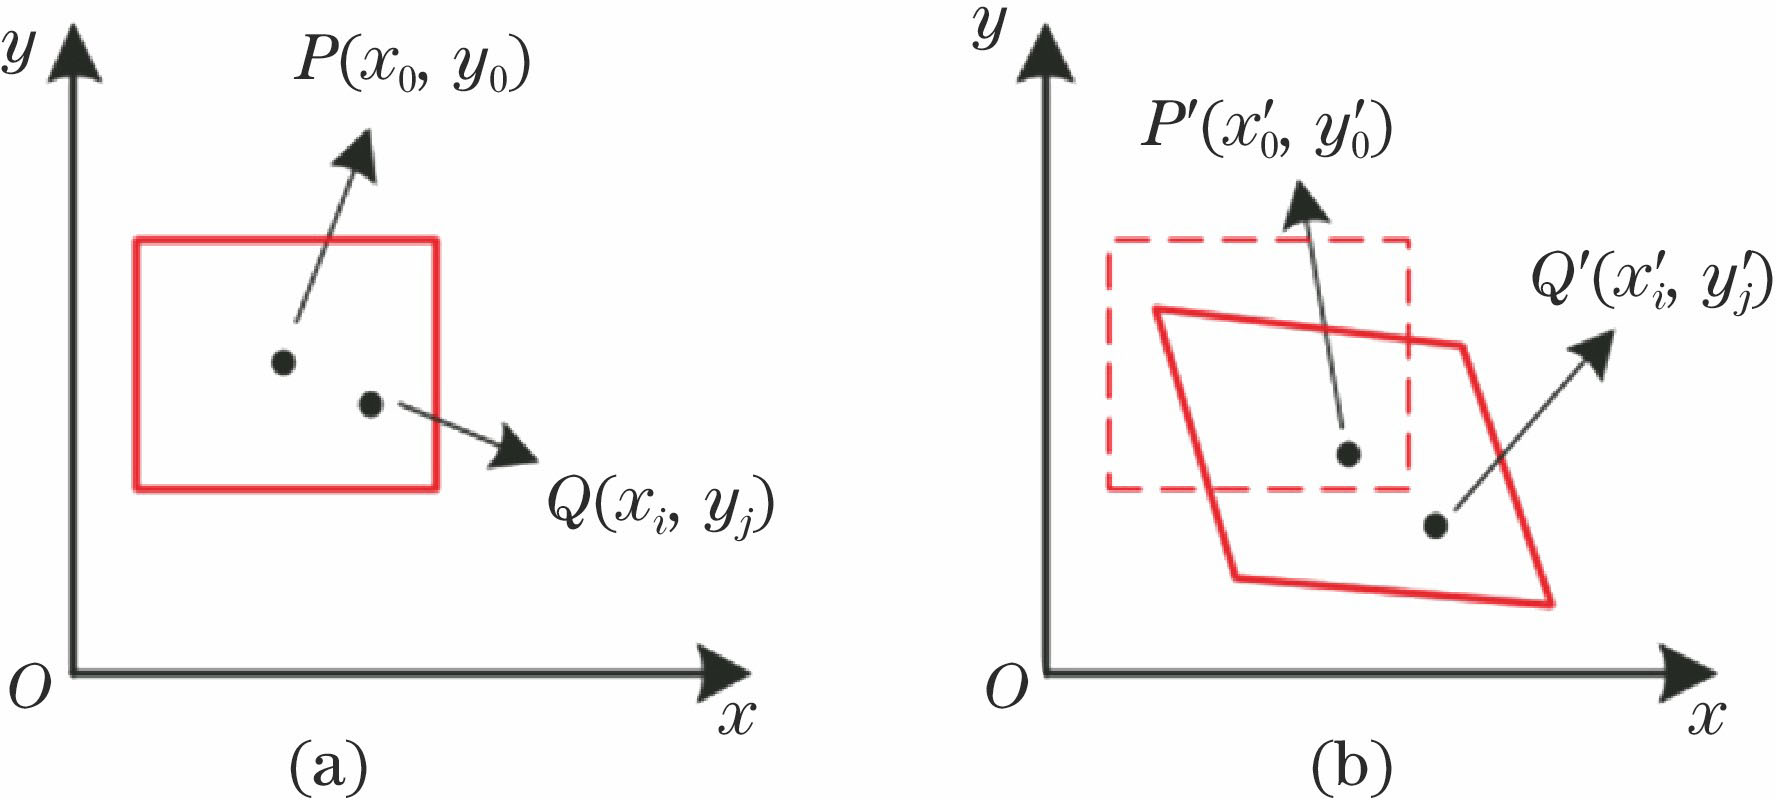 Schematic of subset before and after deformation. (a) Reference image; (b) deformed image